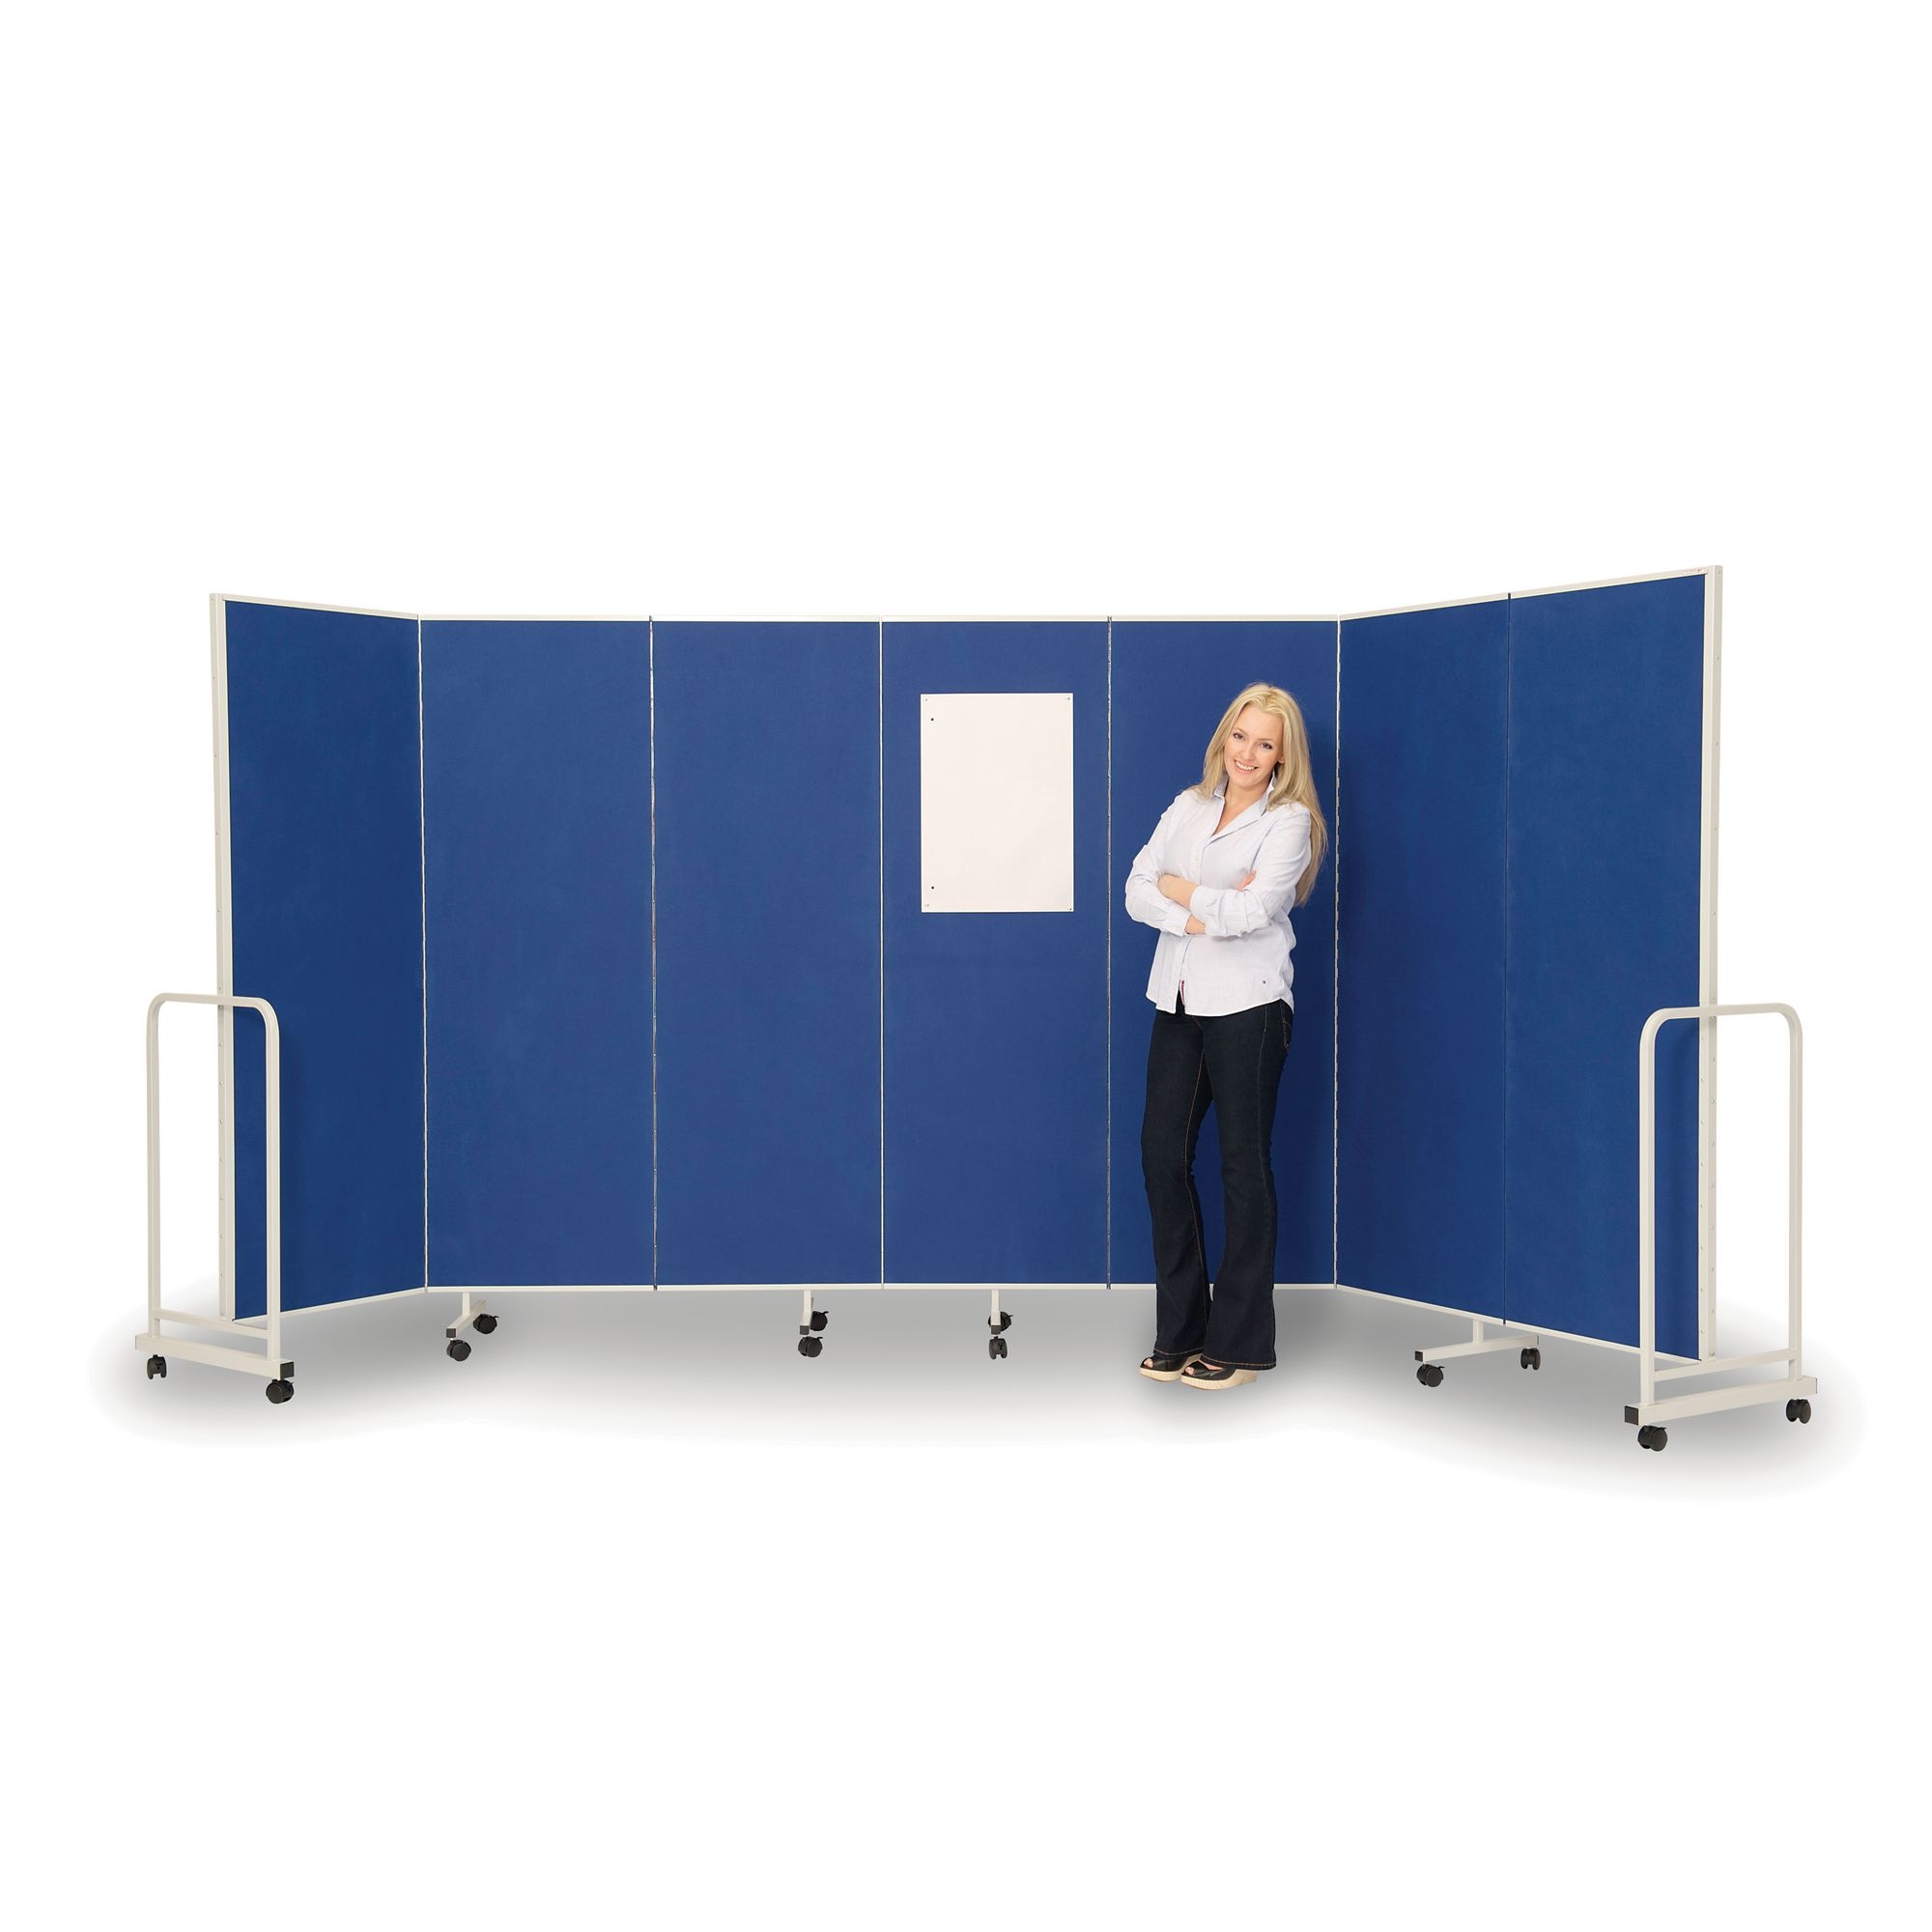 Sound Absorbing Mobile Partitioning - Blue